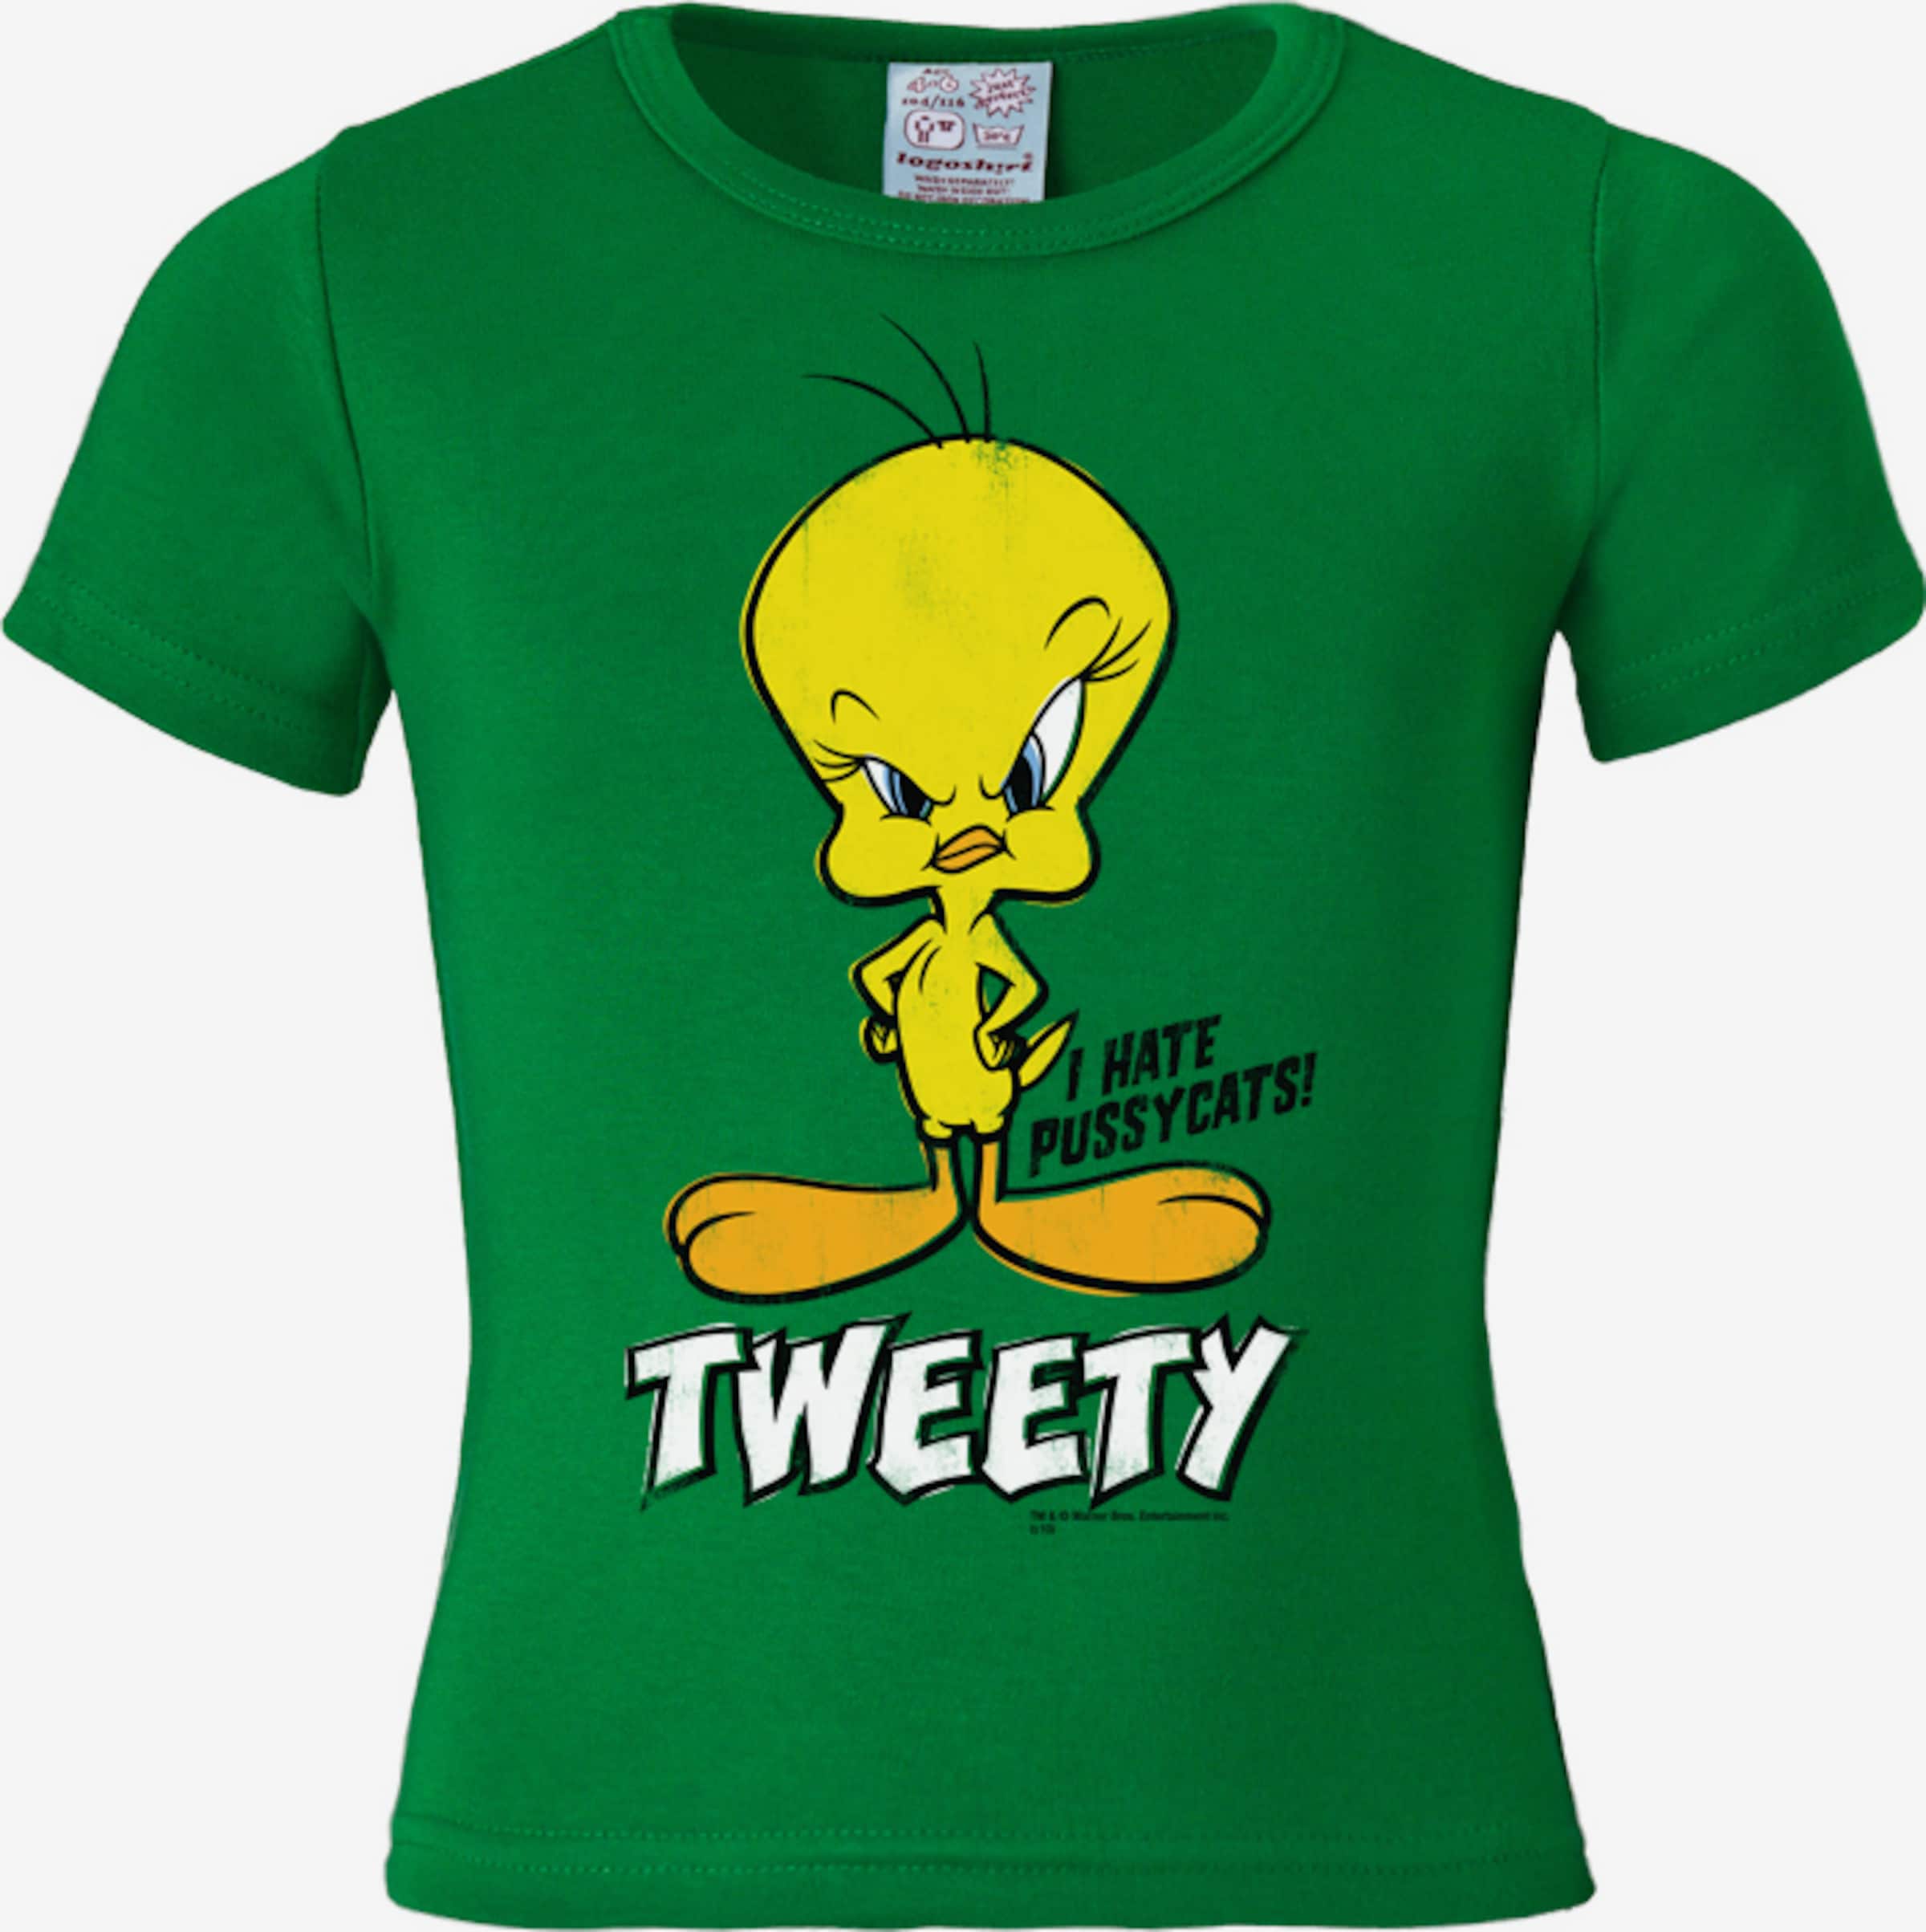 | Pussycats Green - ABOUT Hate Vogel\' I LOGOSHIRT YOU Shirt in \'Tweety